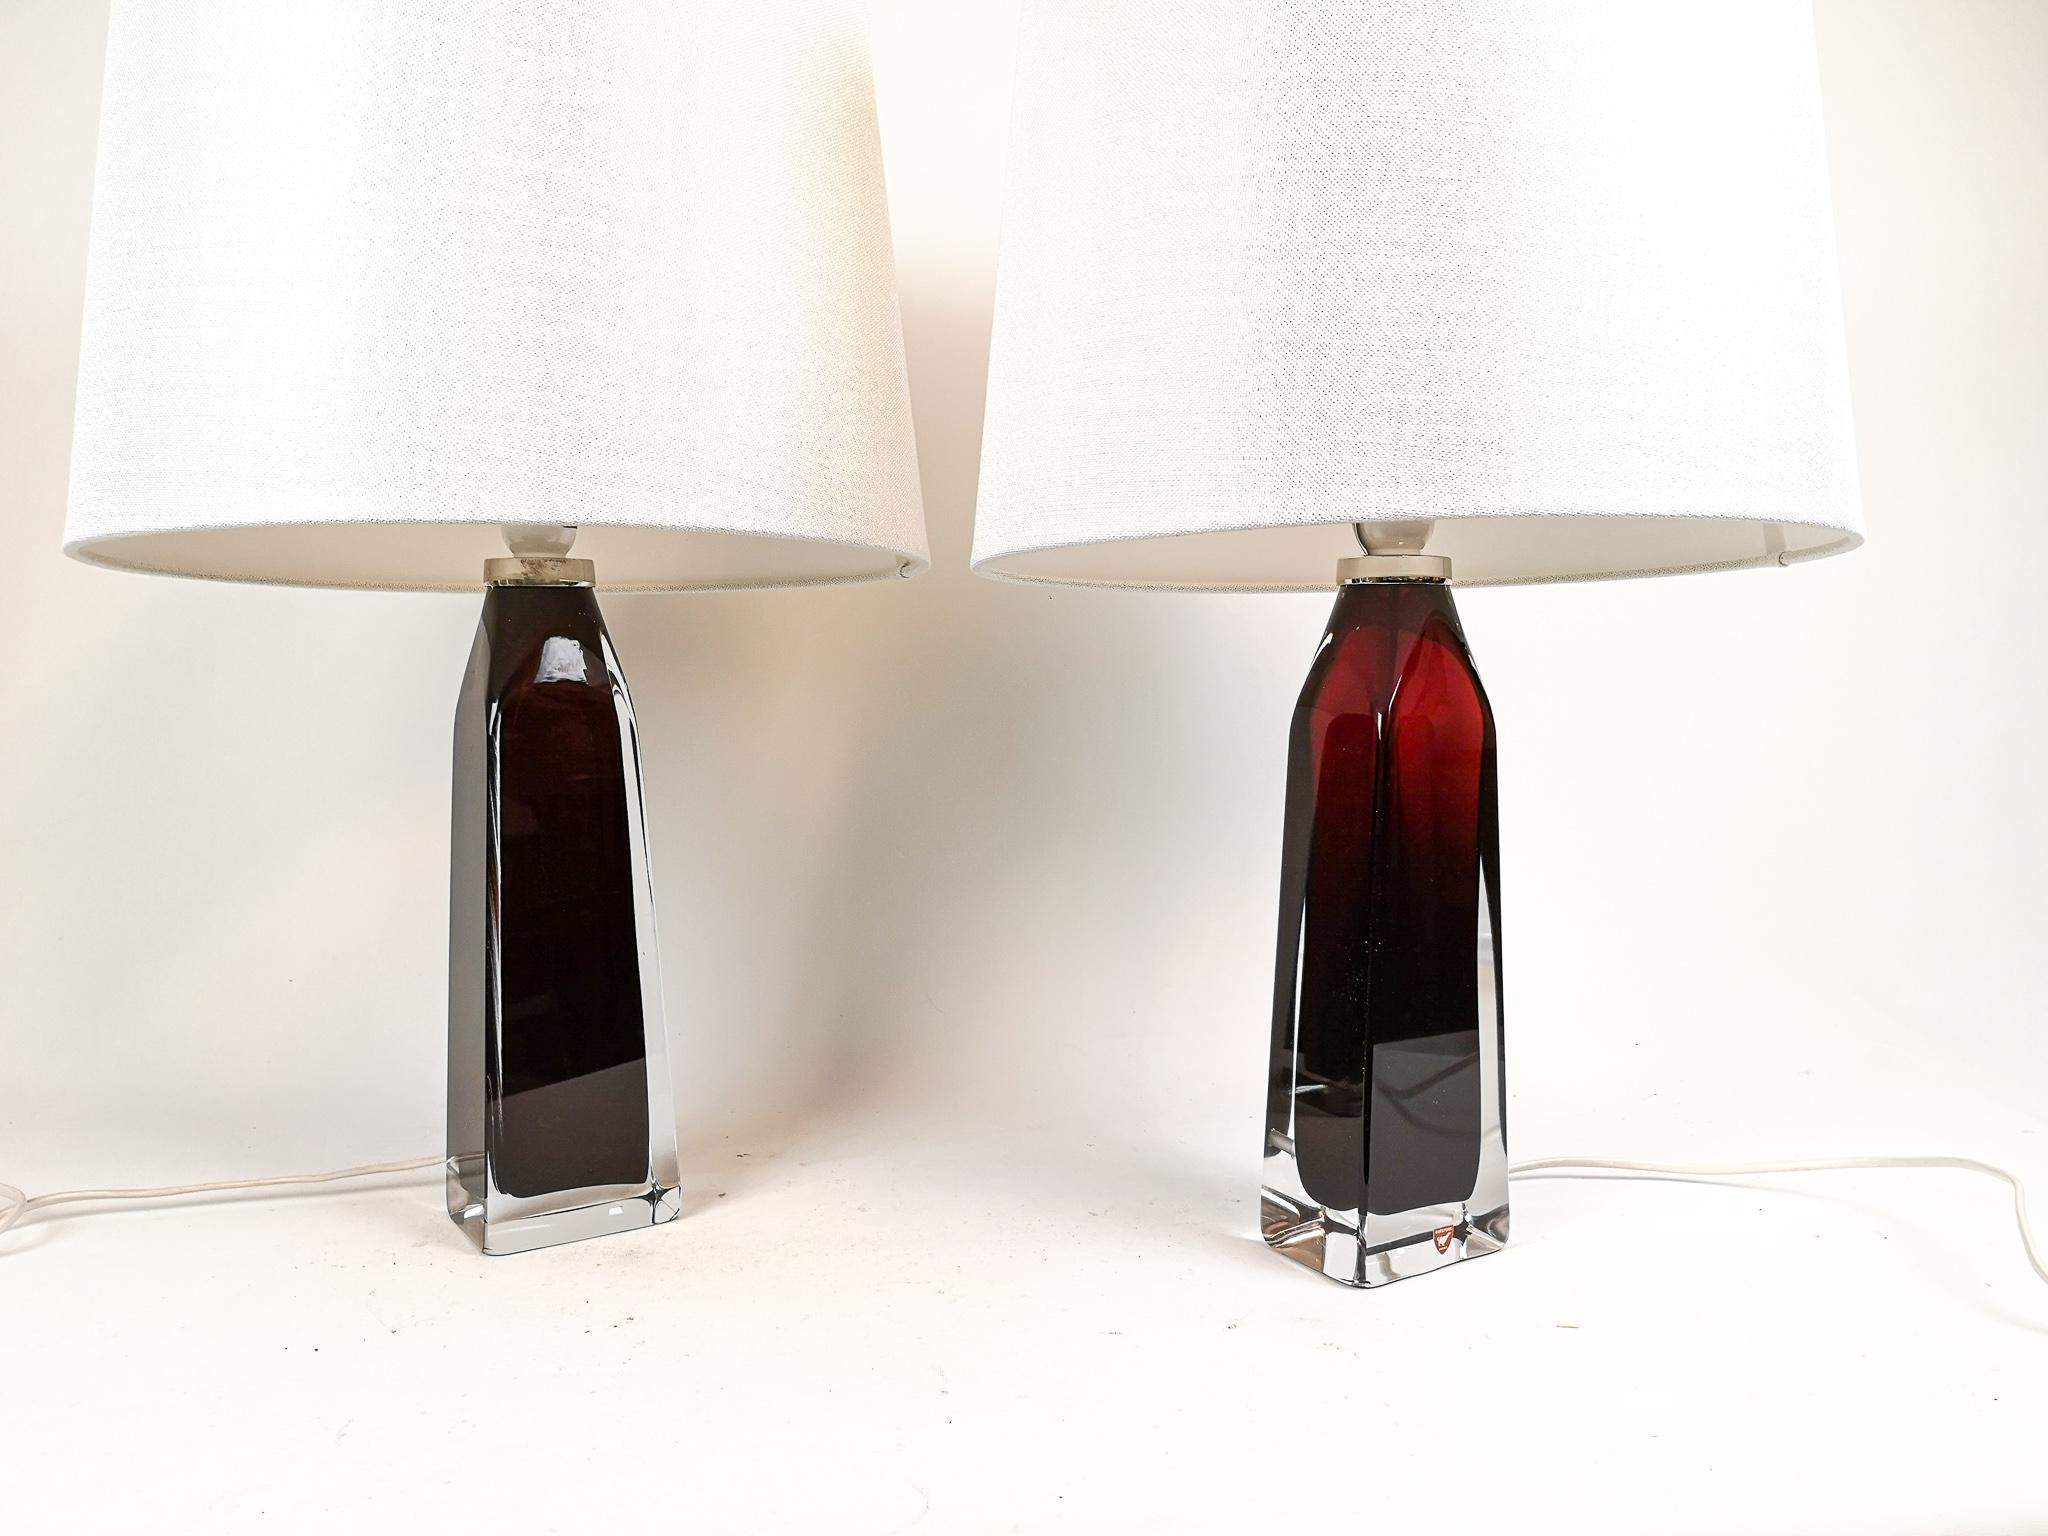 Swedish Midcentury Table Lamps by Carl Fagerlund for Orrefors Sweden RD 1884